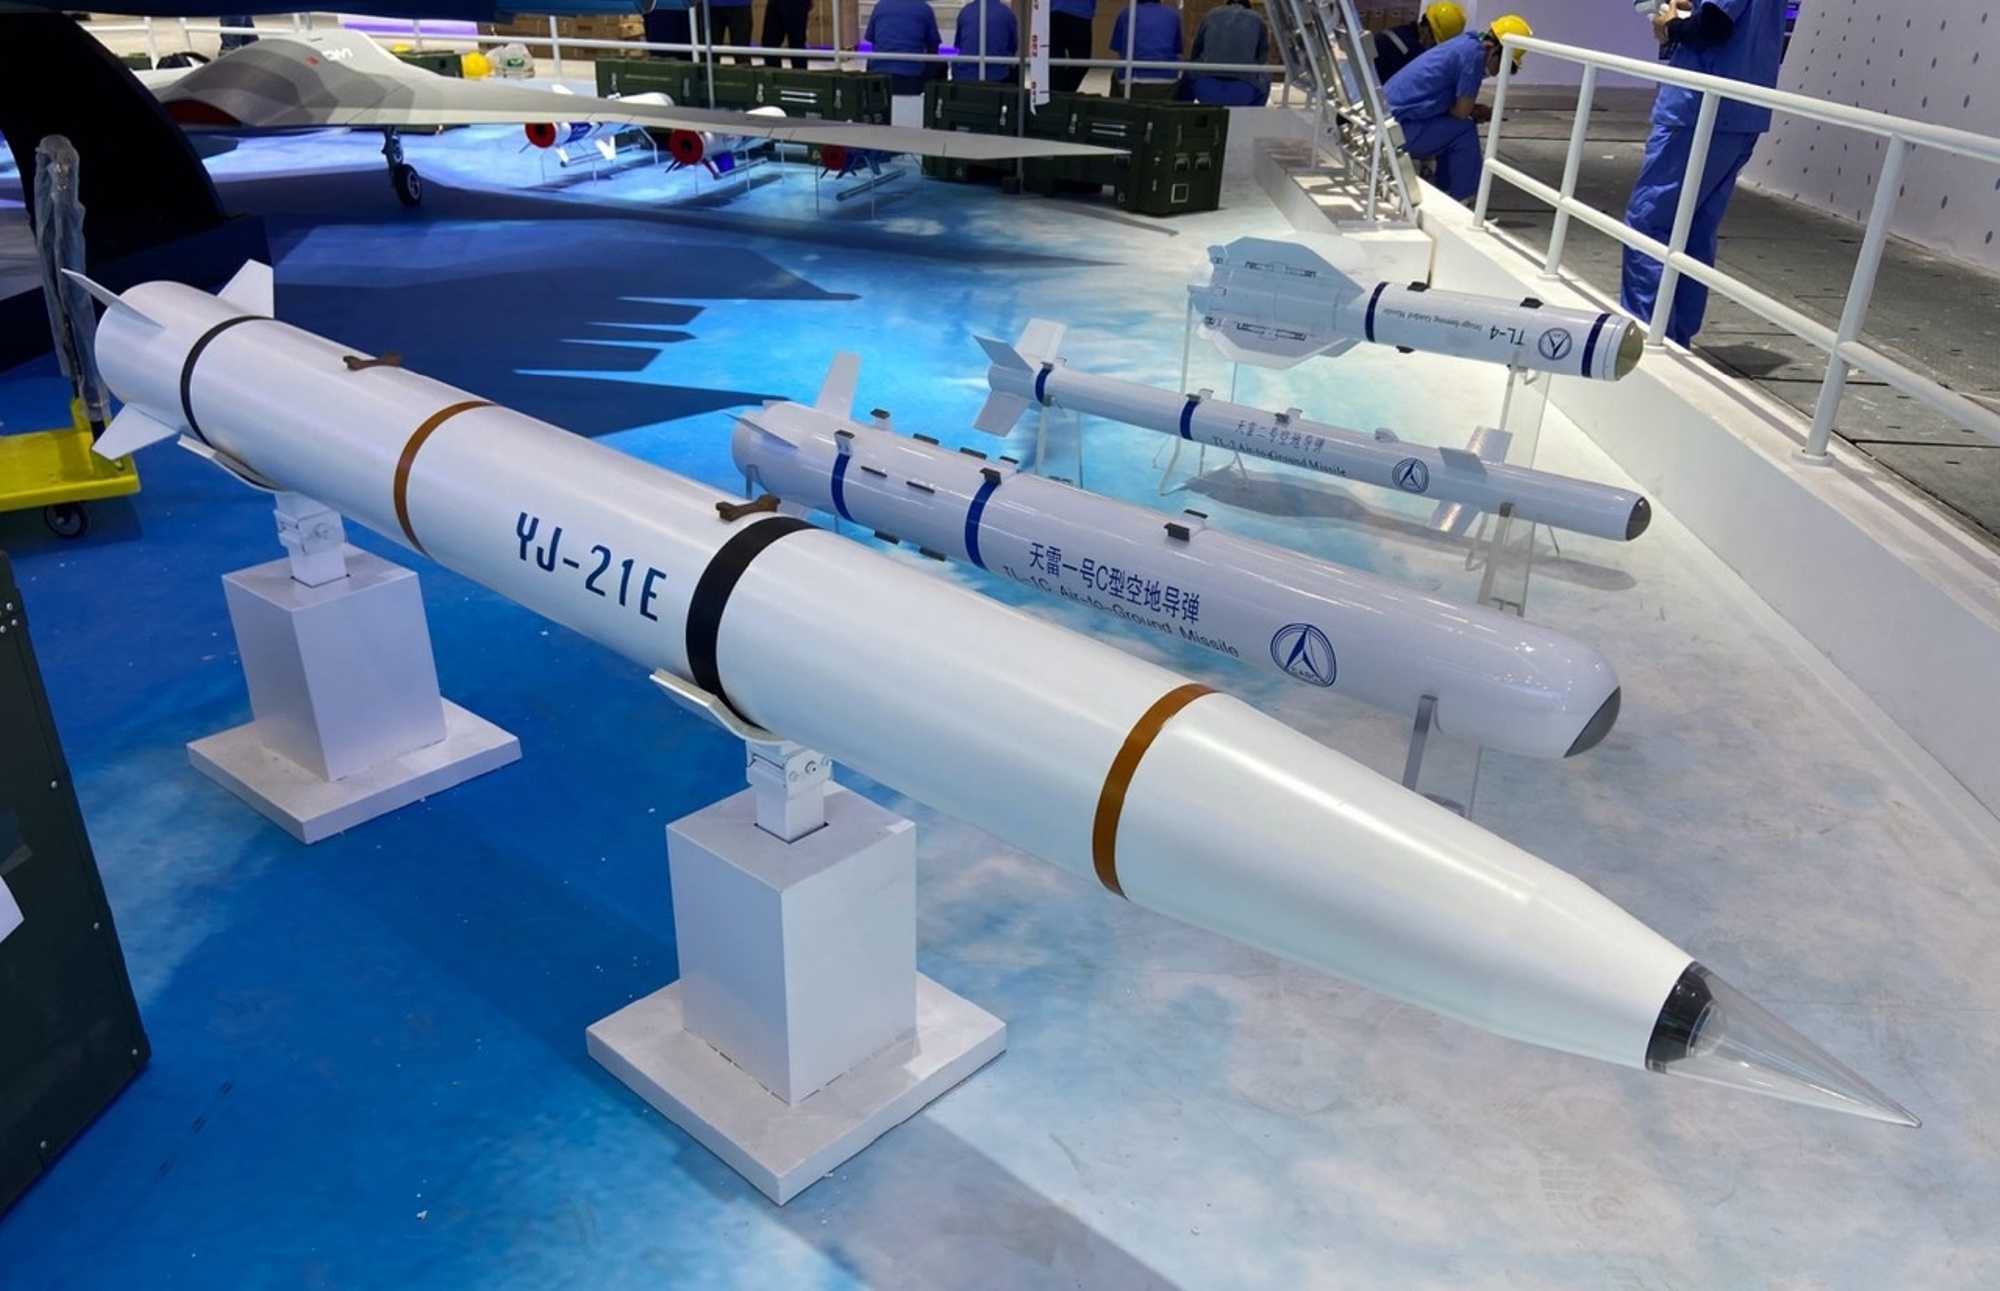 China Hails Its YJ-21 Hypersonic Ship-Launched Missile That Can 'Strike Enemy Ships Without Being Intercepted'